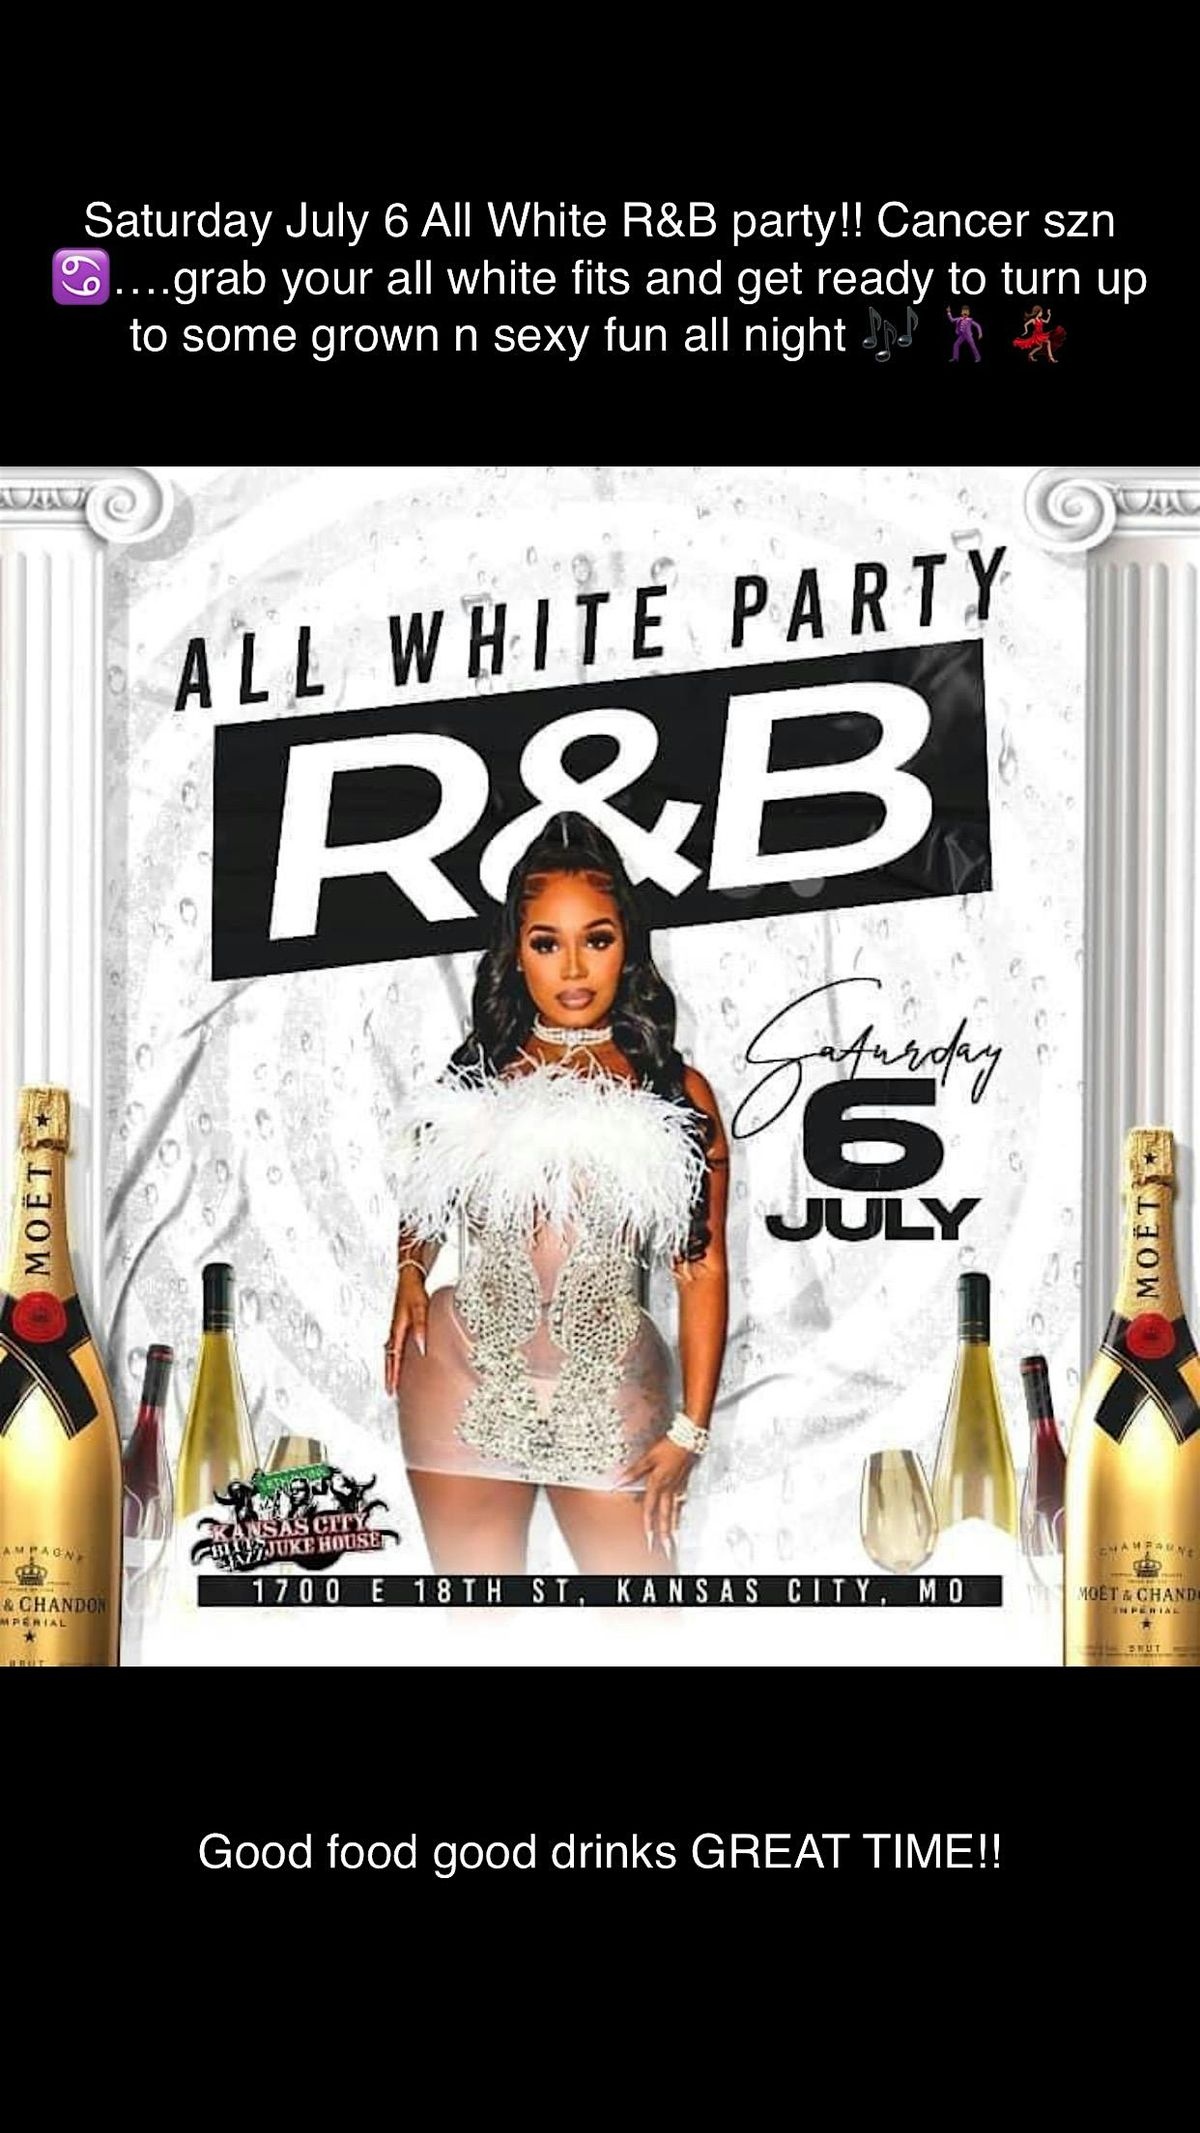 All White R&B Only Party